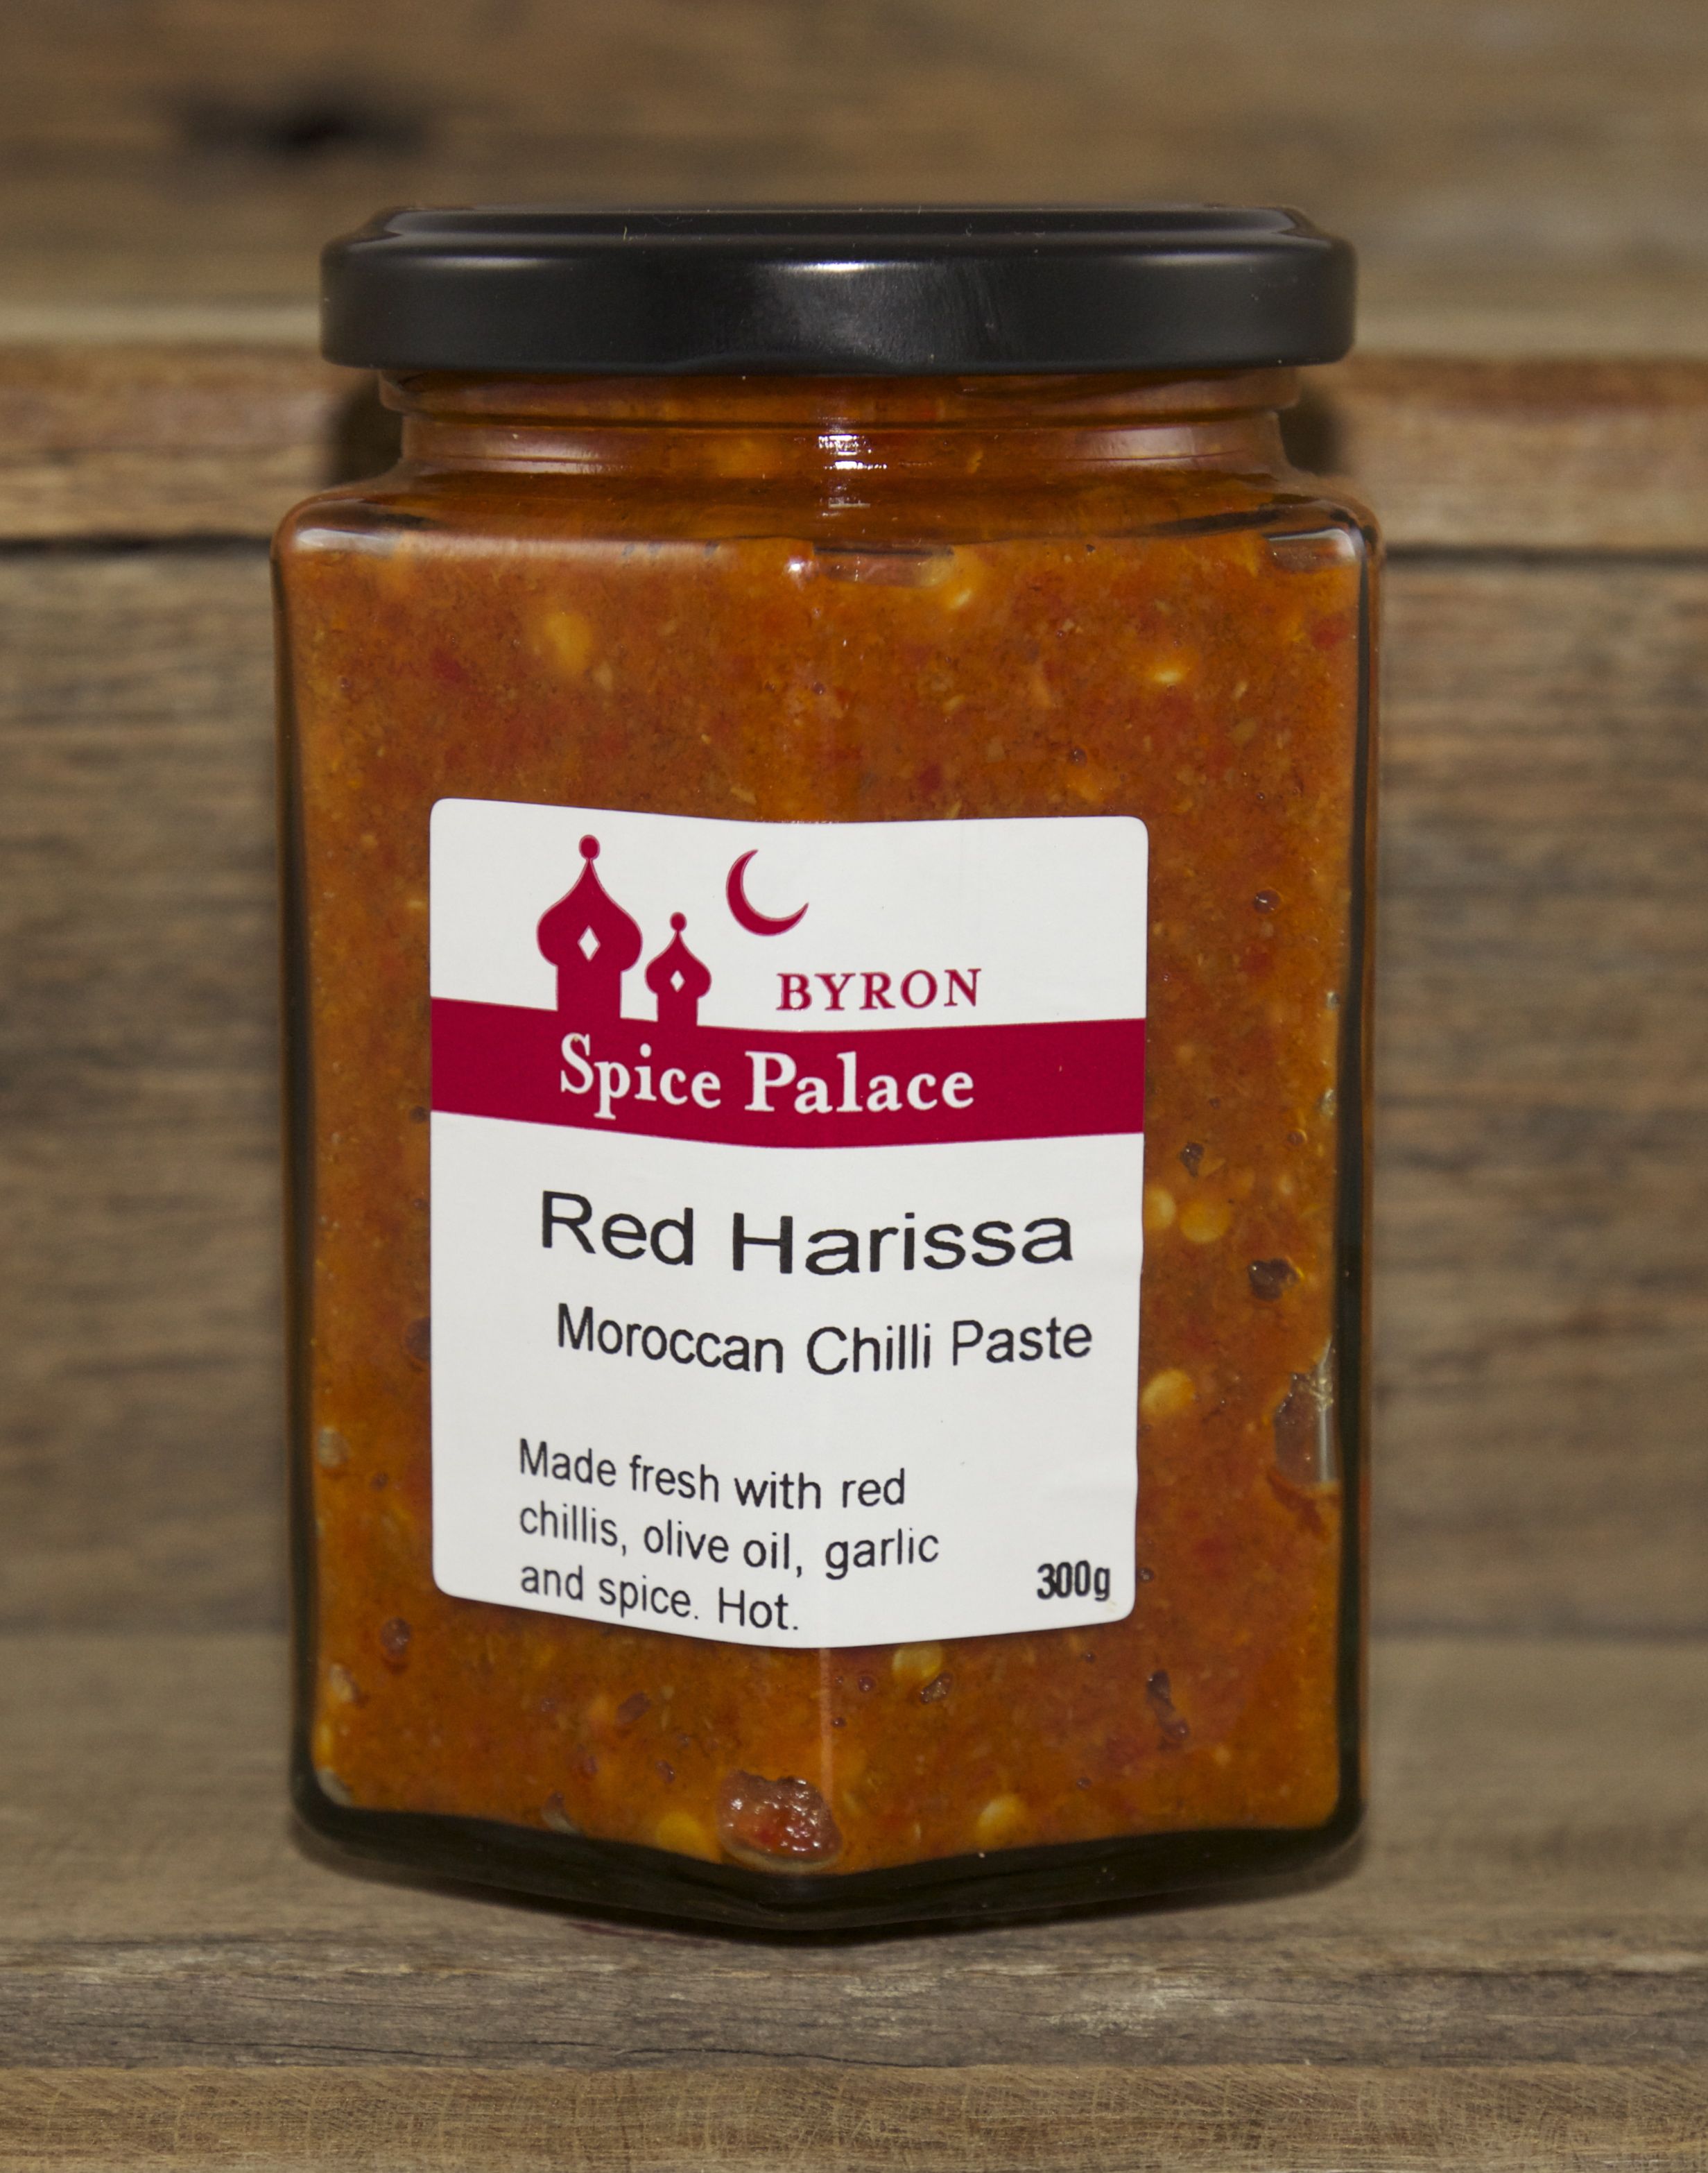 Red Harissa Chilli Paste. 200g - Spice Palace